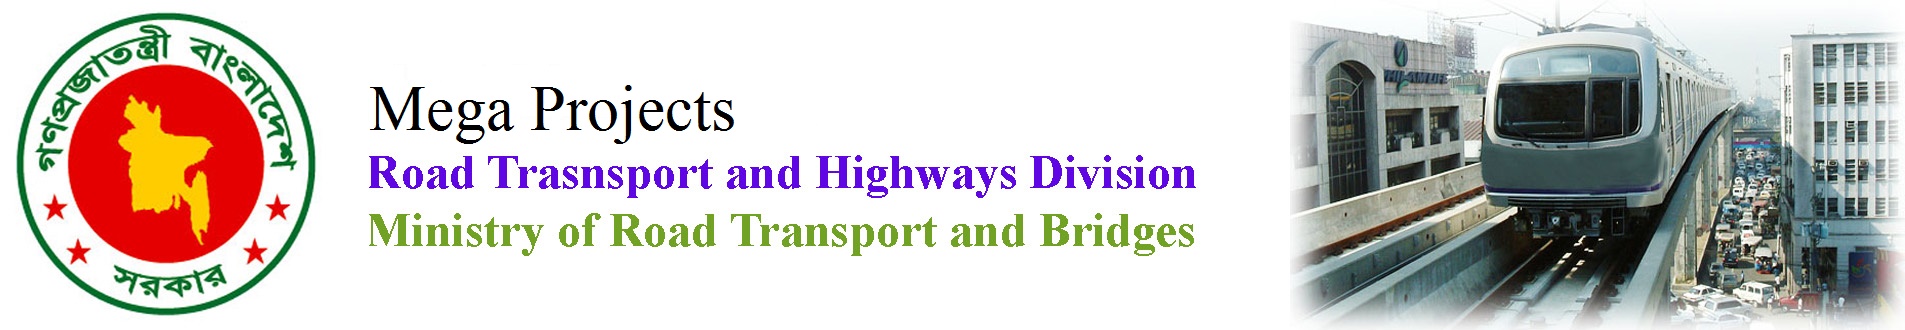 Road Transport and Highways Division